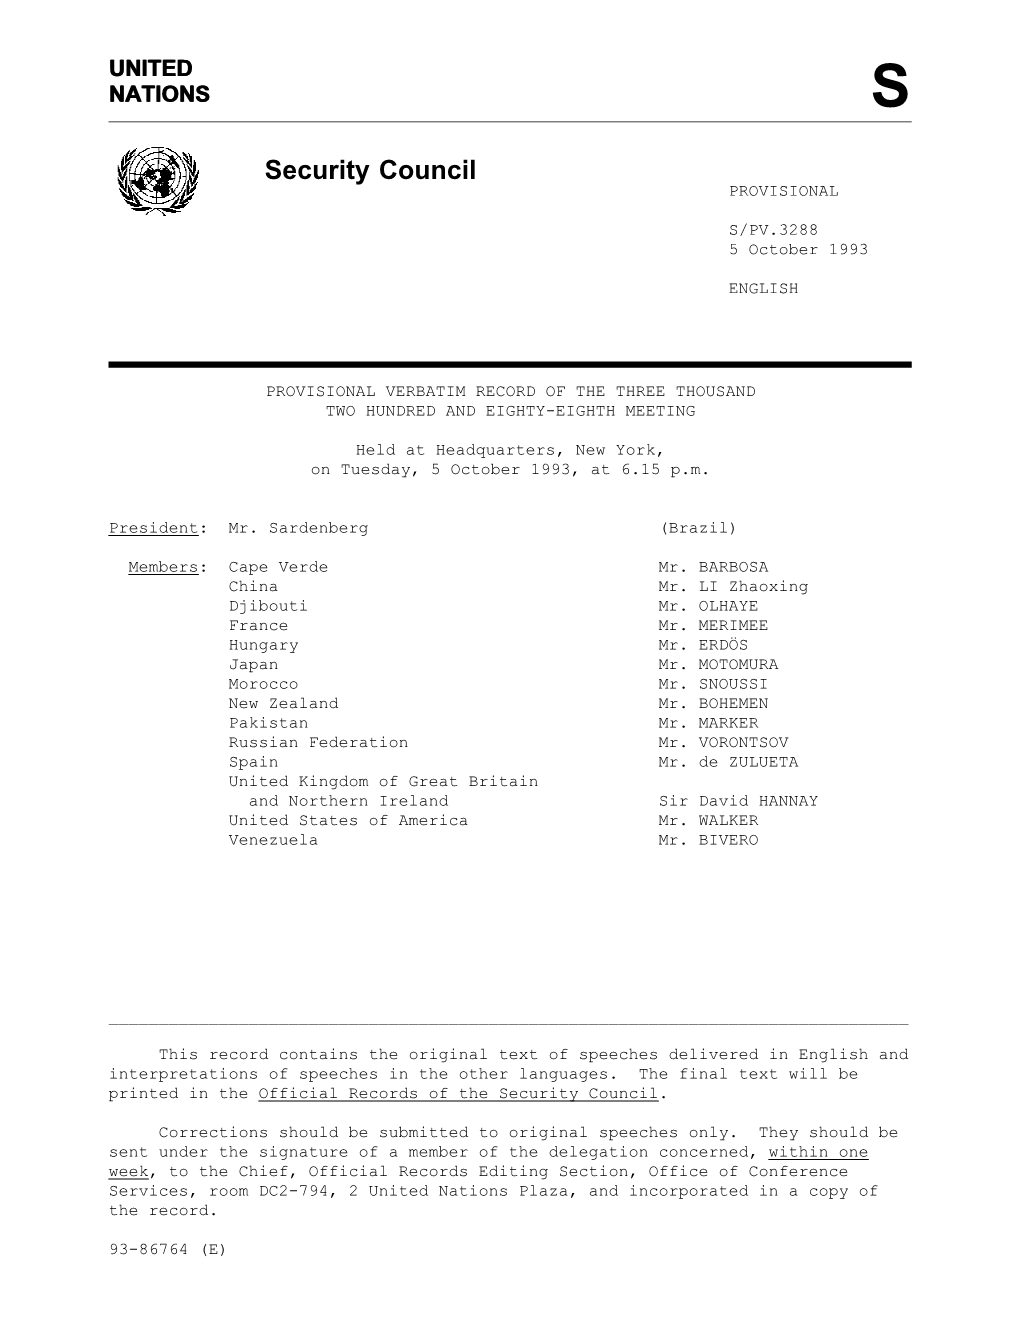 Security Council PROVISIONAL